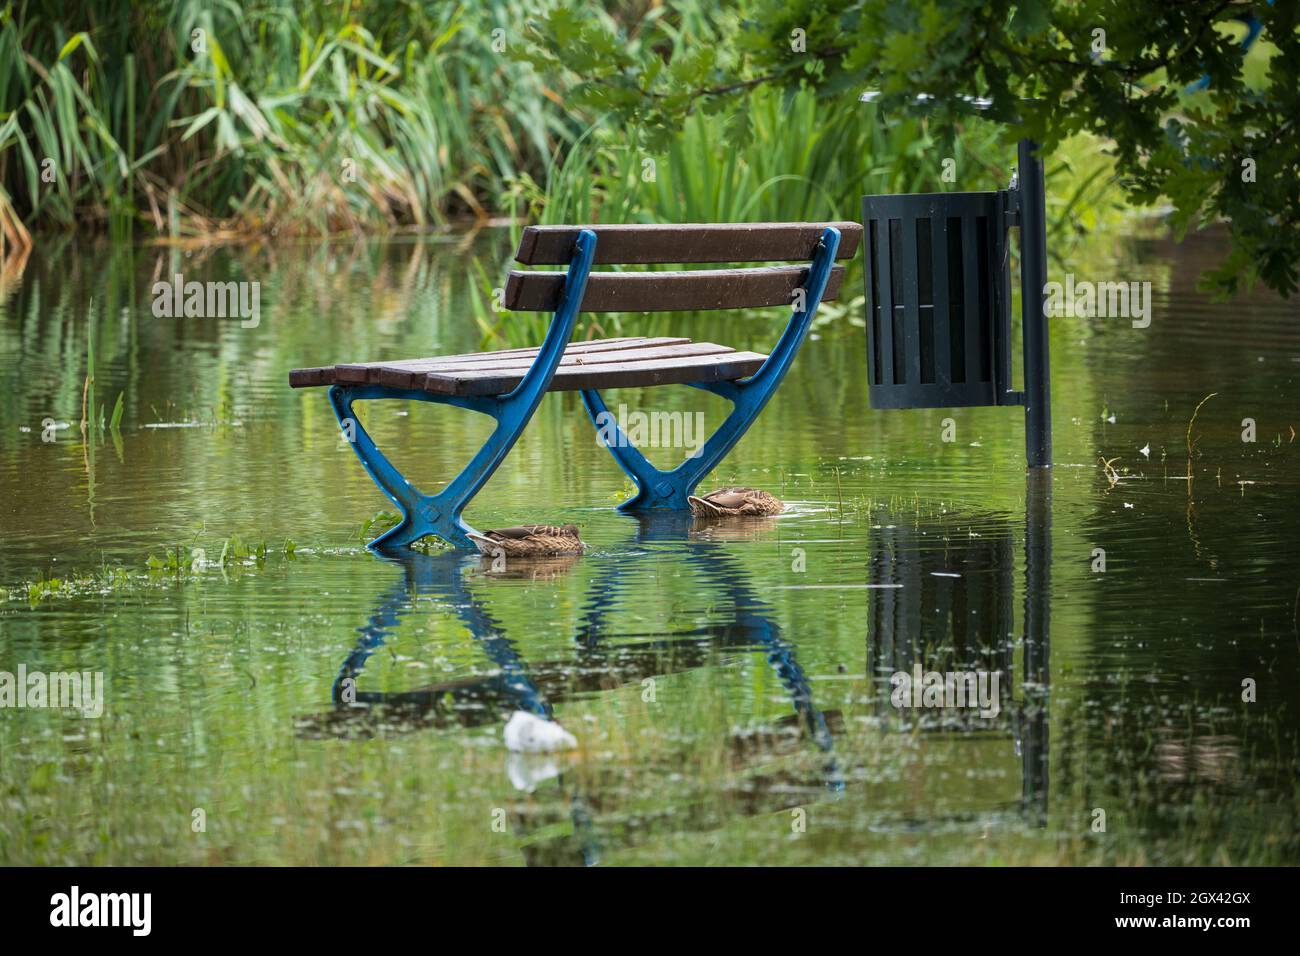 Flooded park bench and trashcan by the pond in spring with two ducks in flood water, natural disaster concept. Stock Photo